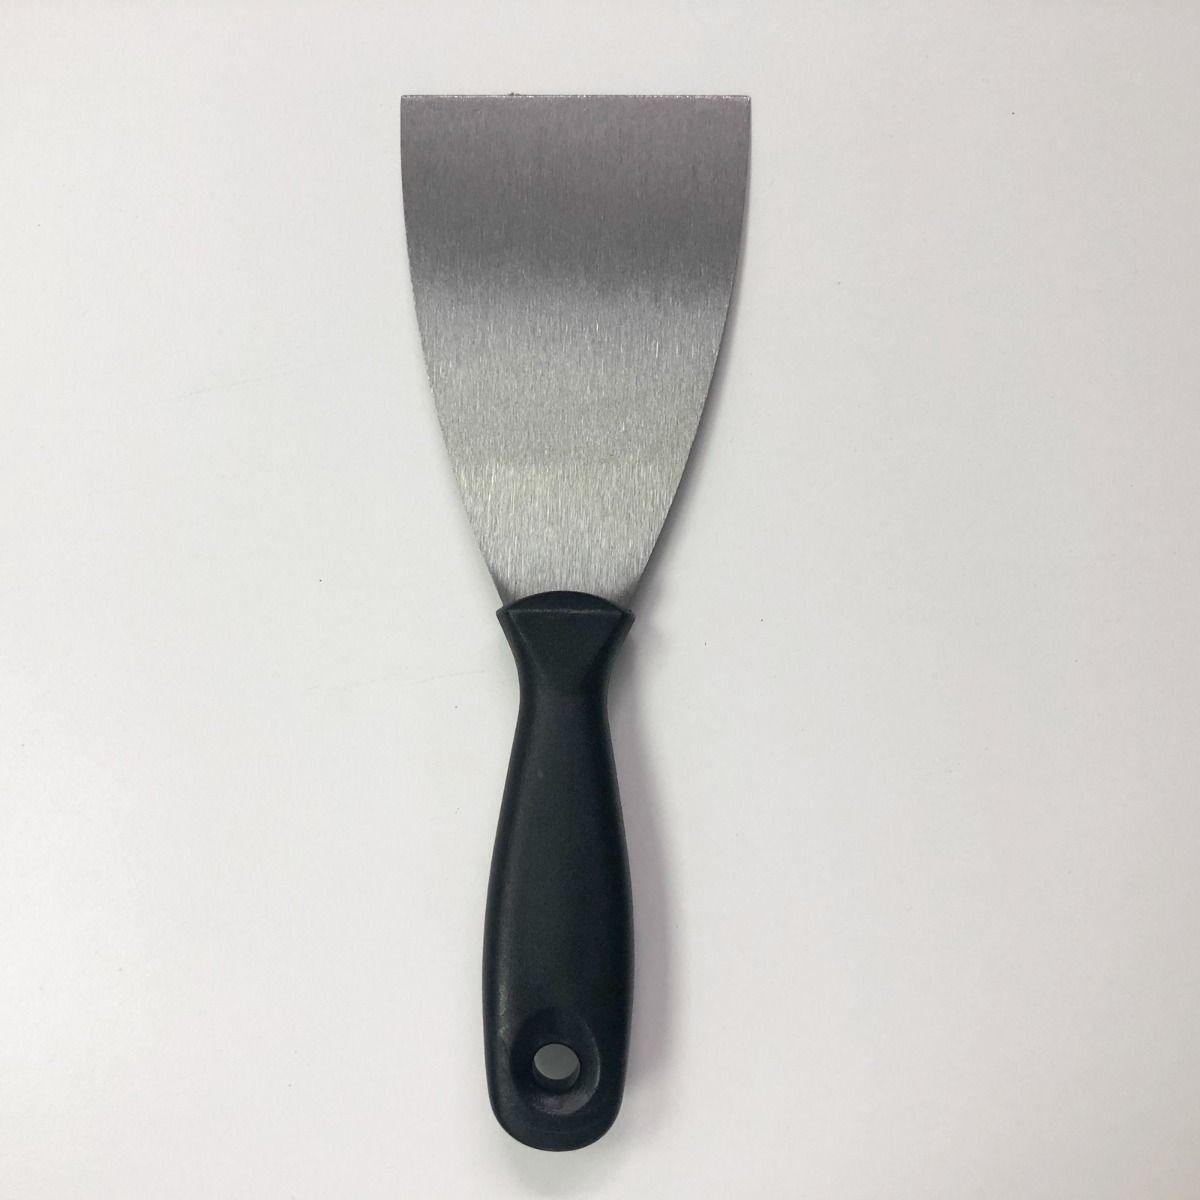 Stripping Knife Wallpapering Tool